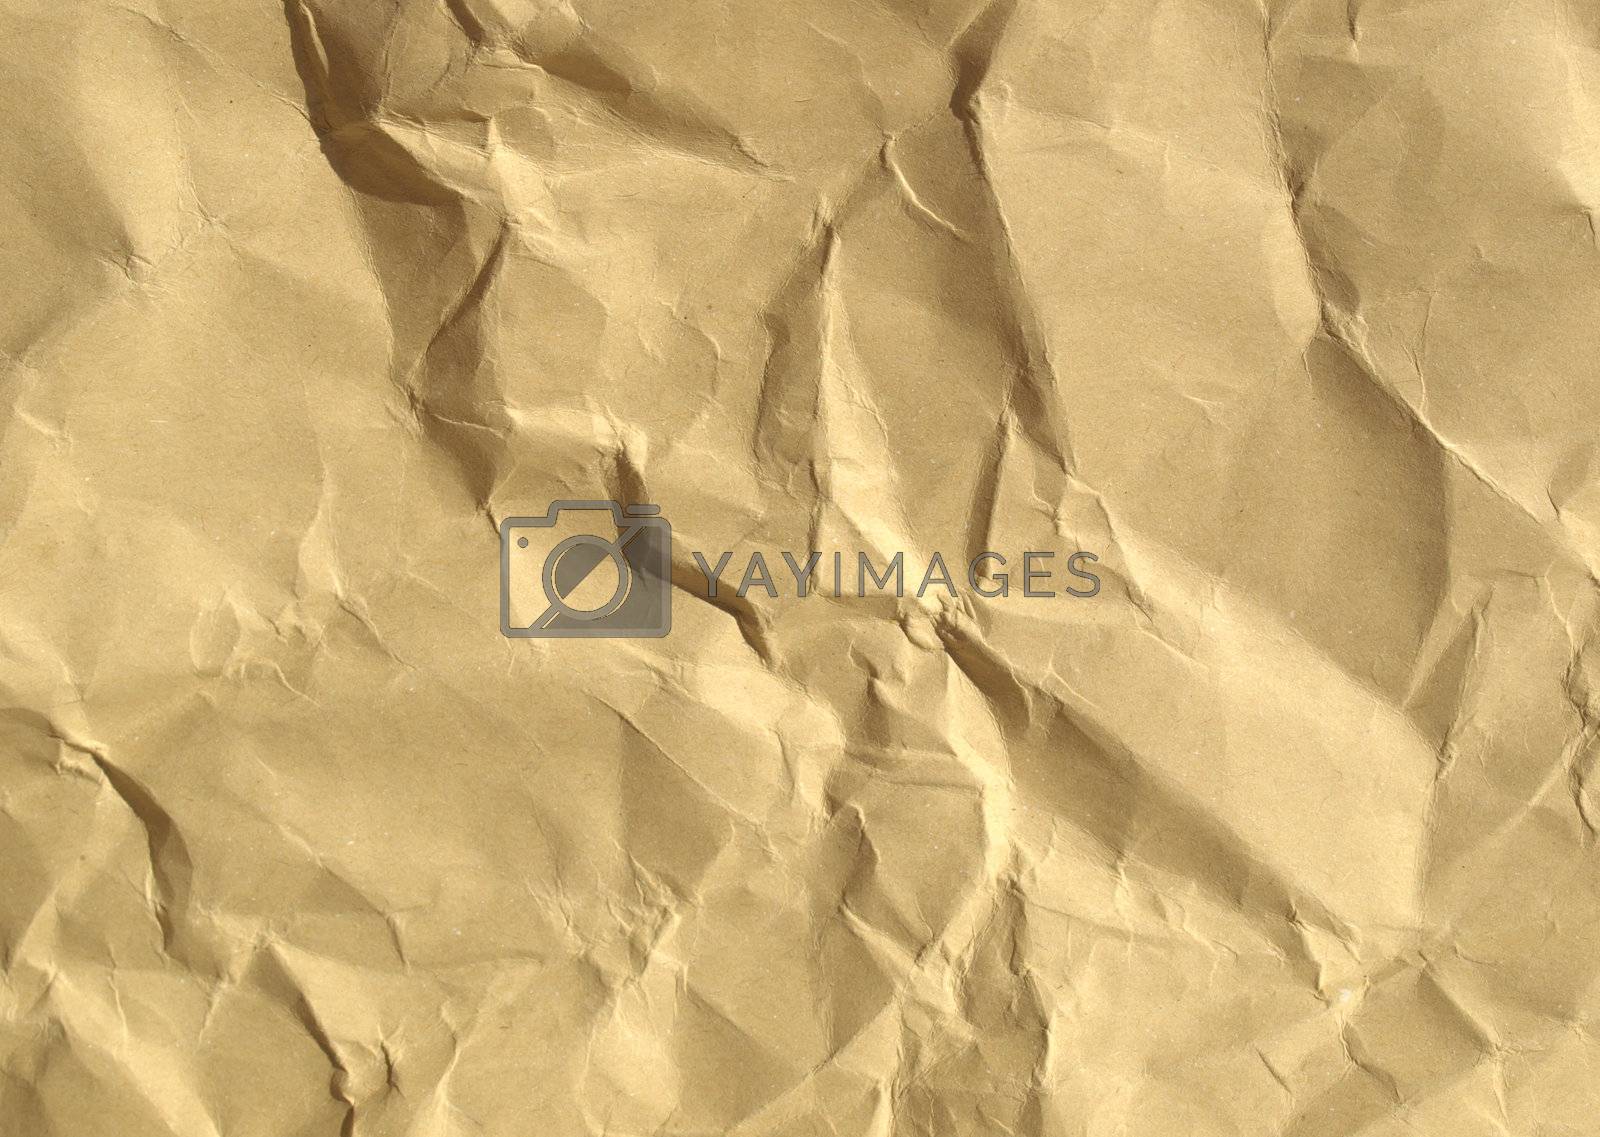 Royalty free image of Rippled paper by claudiodivizia